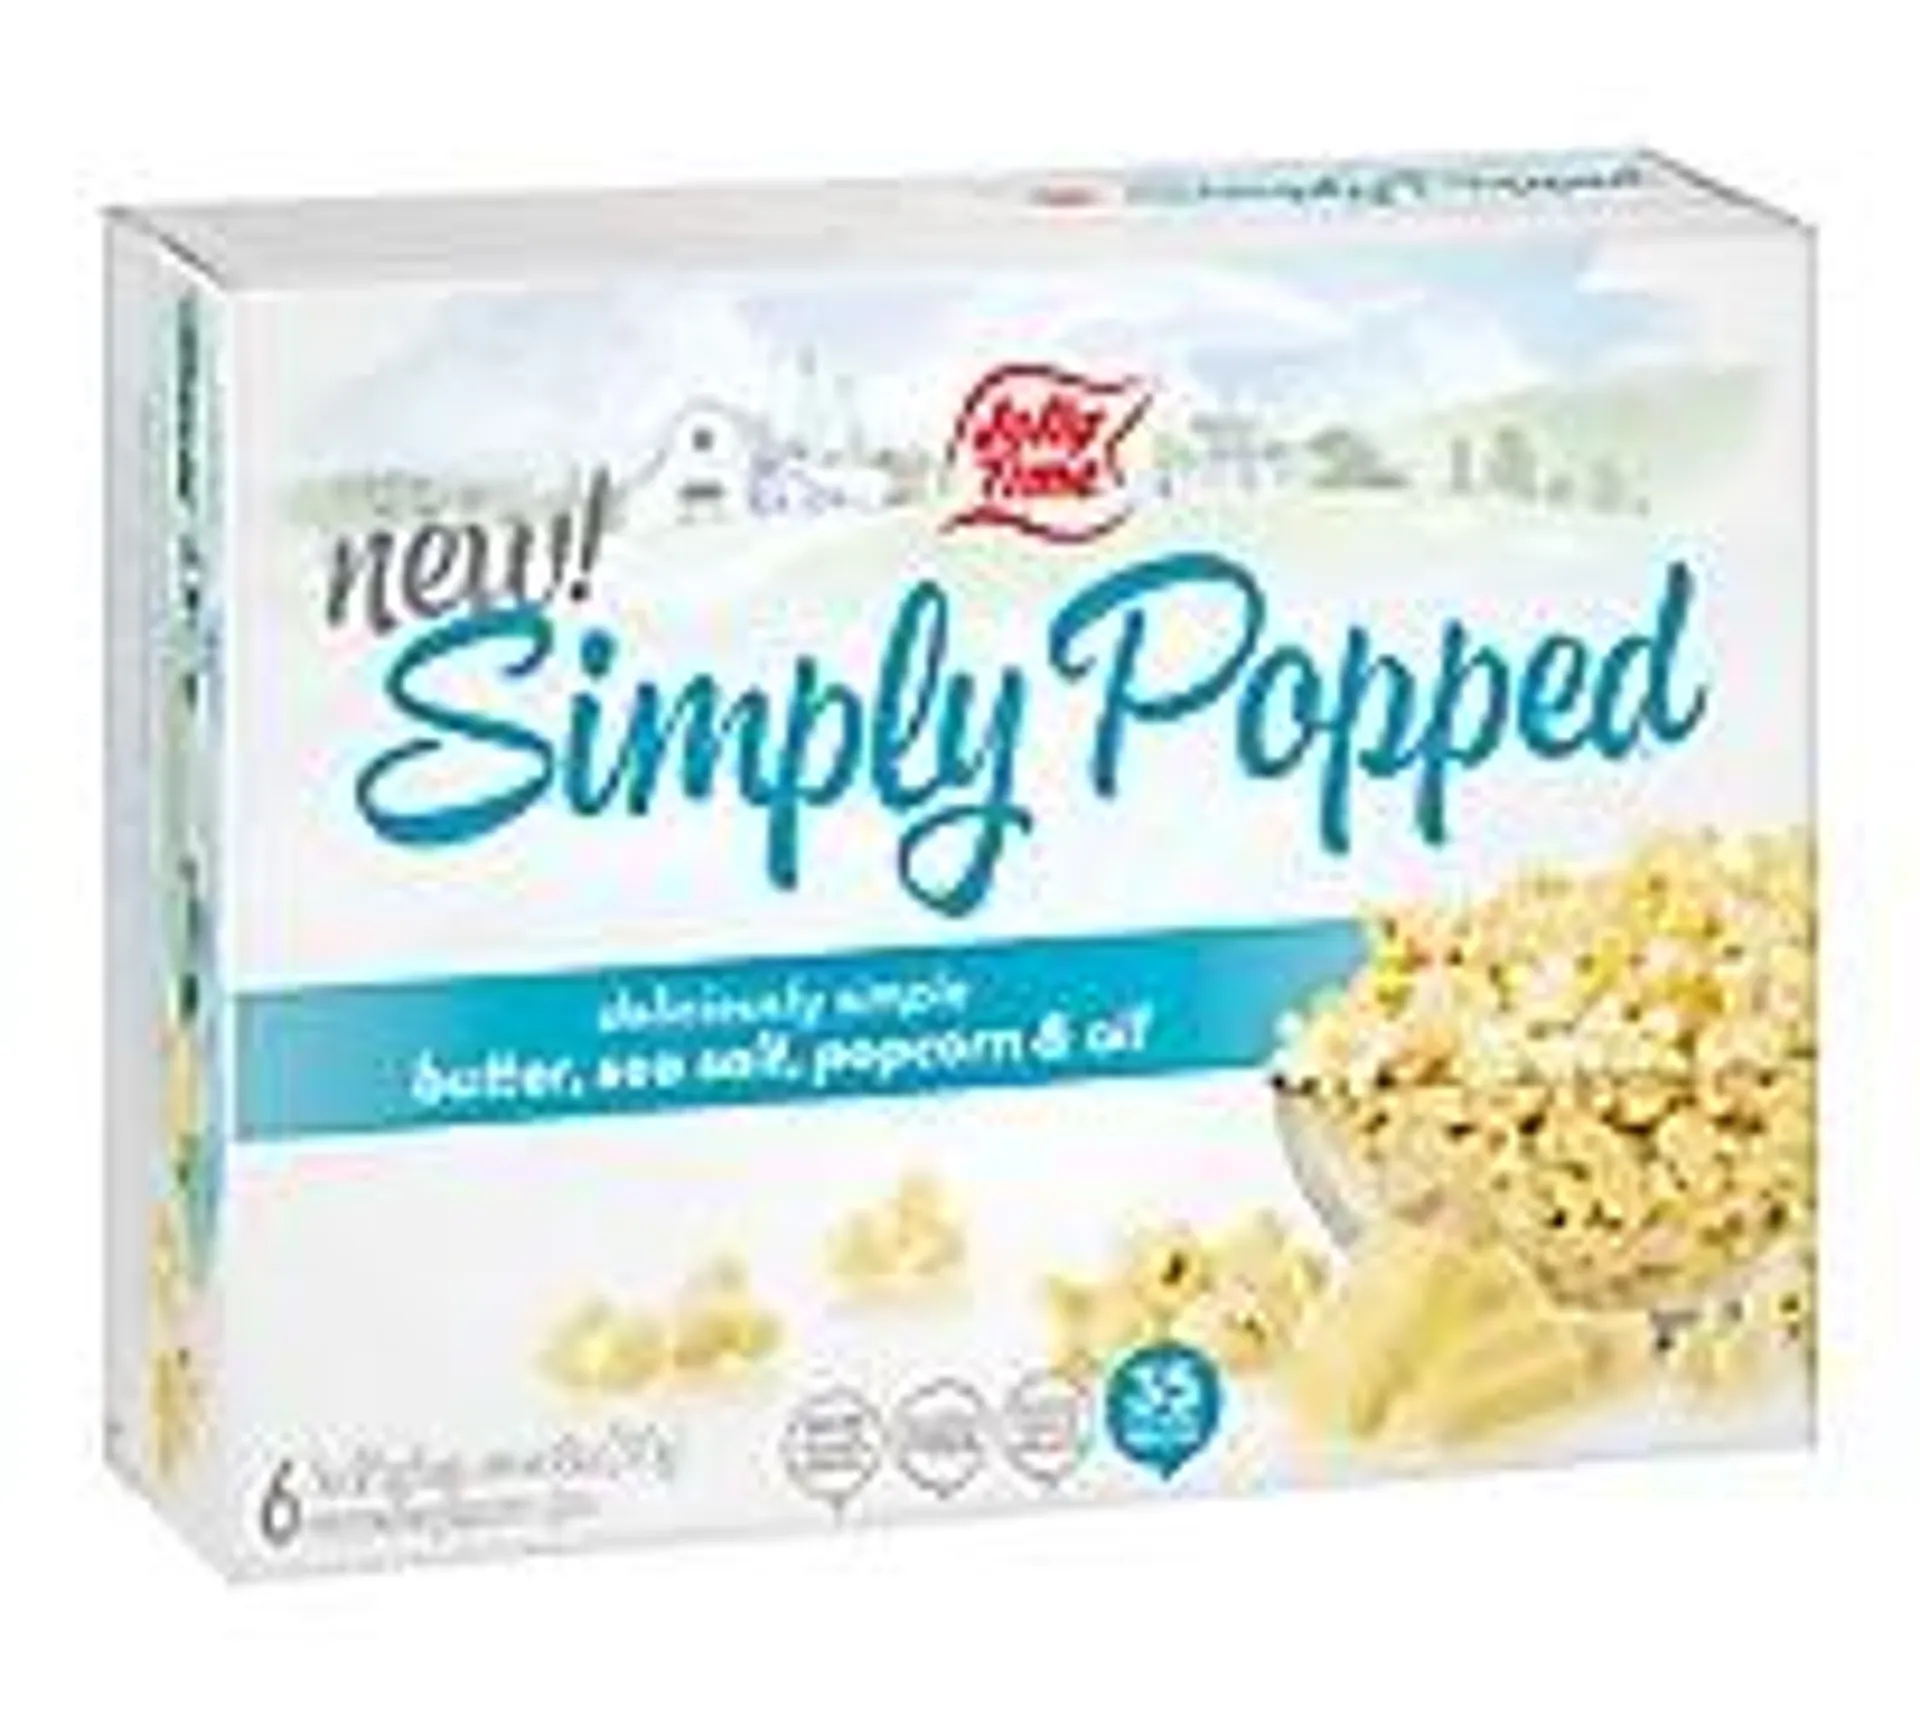 Jolly Time Microwave Popcorn Simply Popped - 6 count